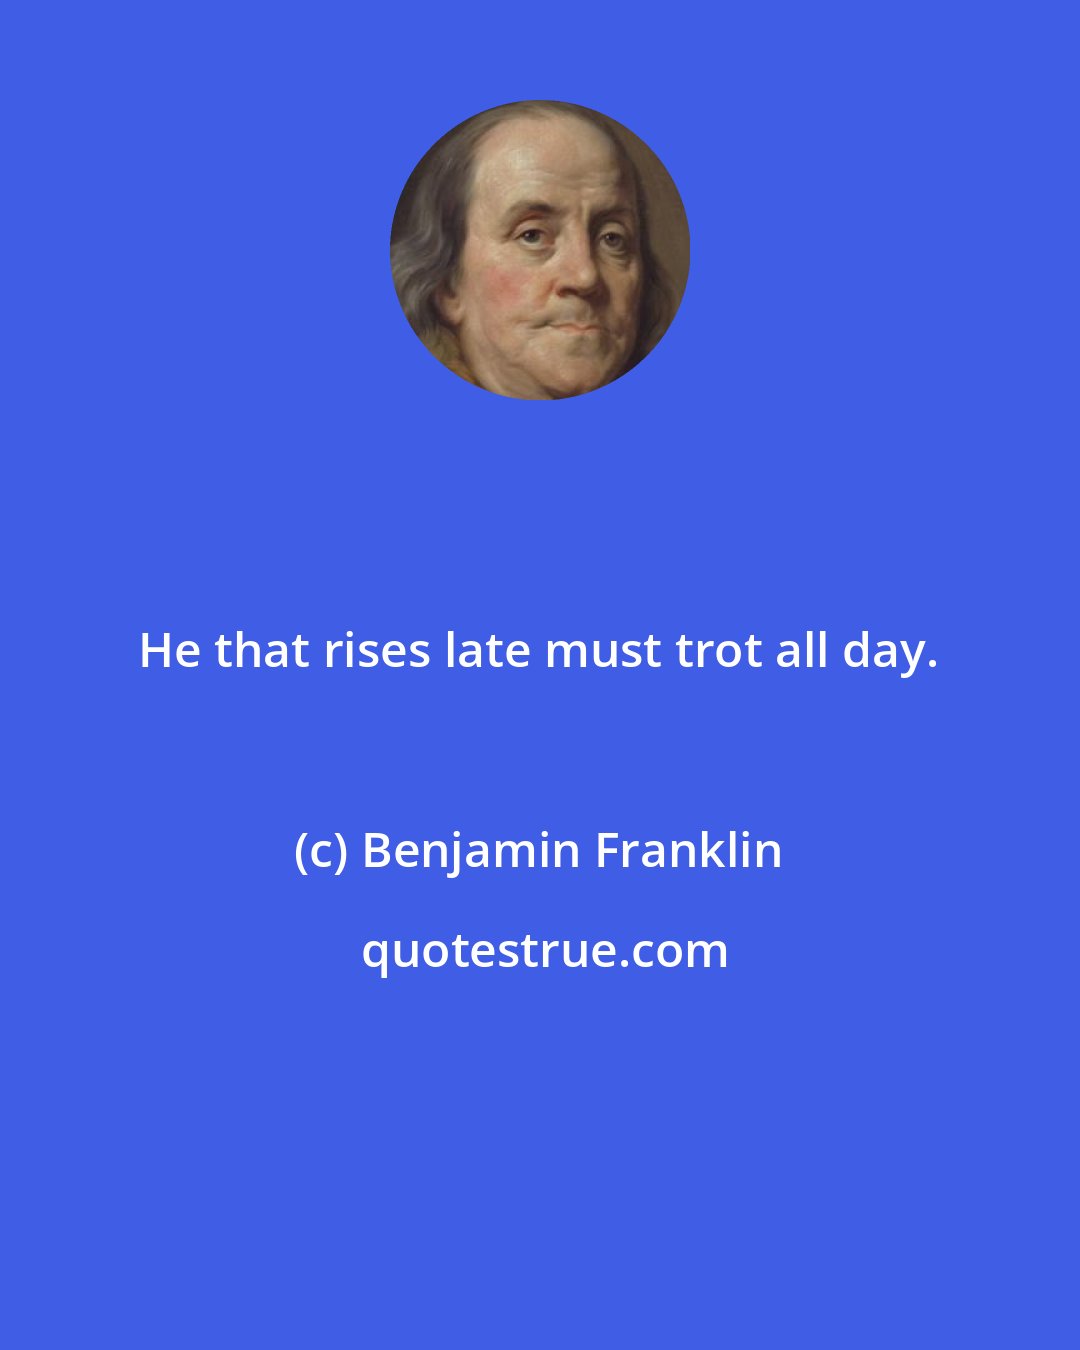 Benjamin Franklin: He that rises late must trot all day.